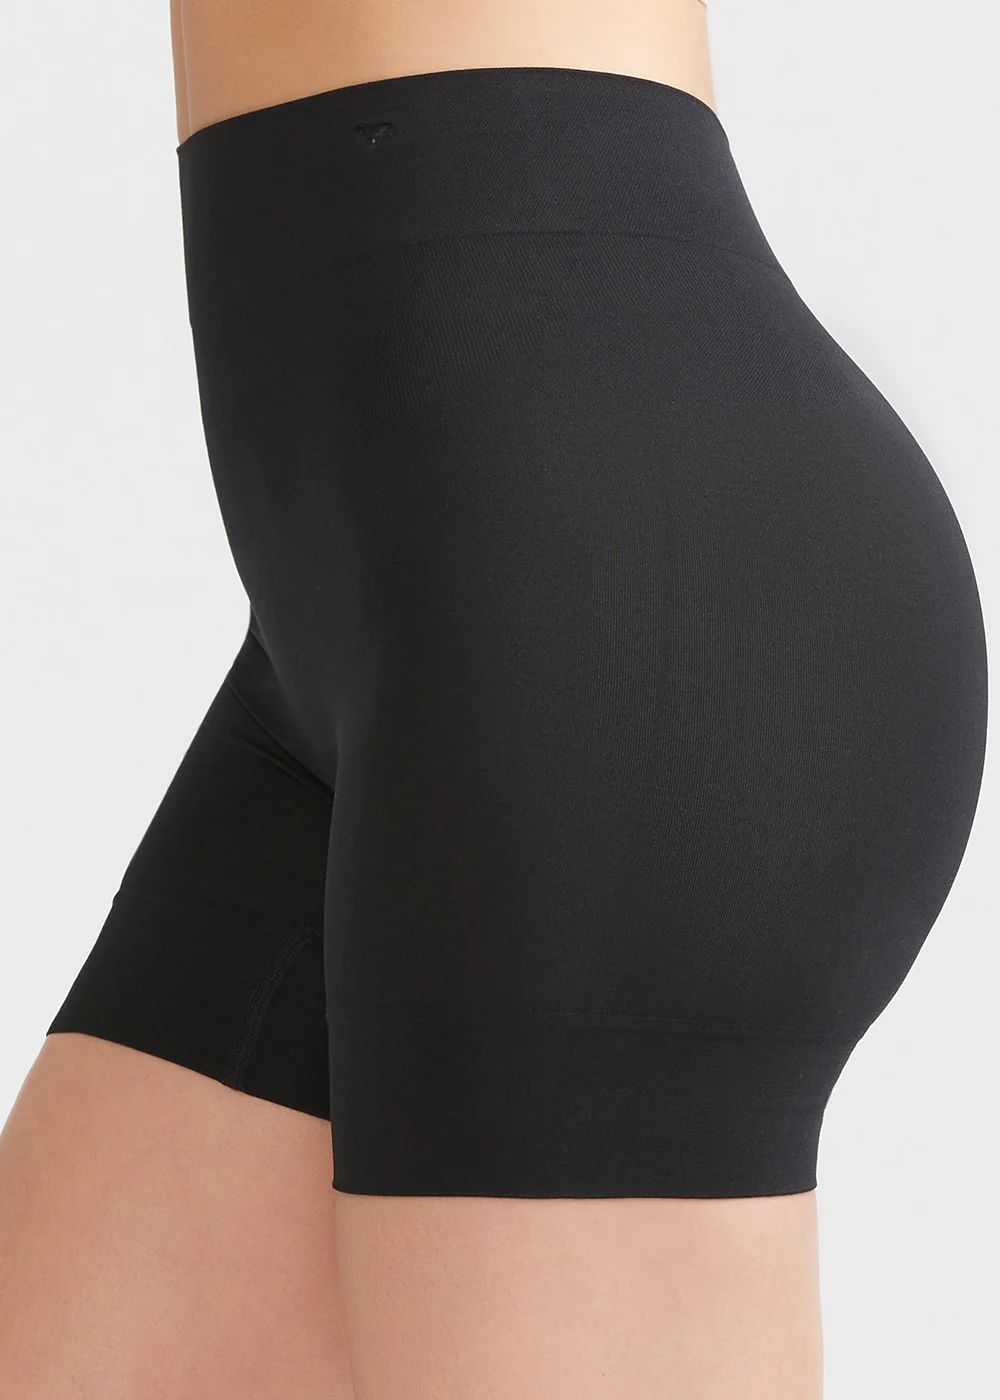 Bria Comfortably Curved Smoothing Short - Seamless | Yummie